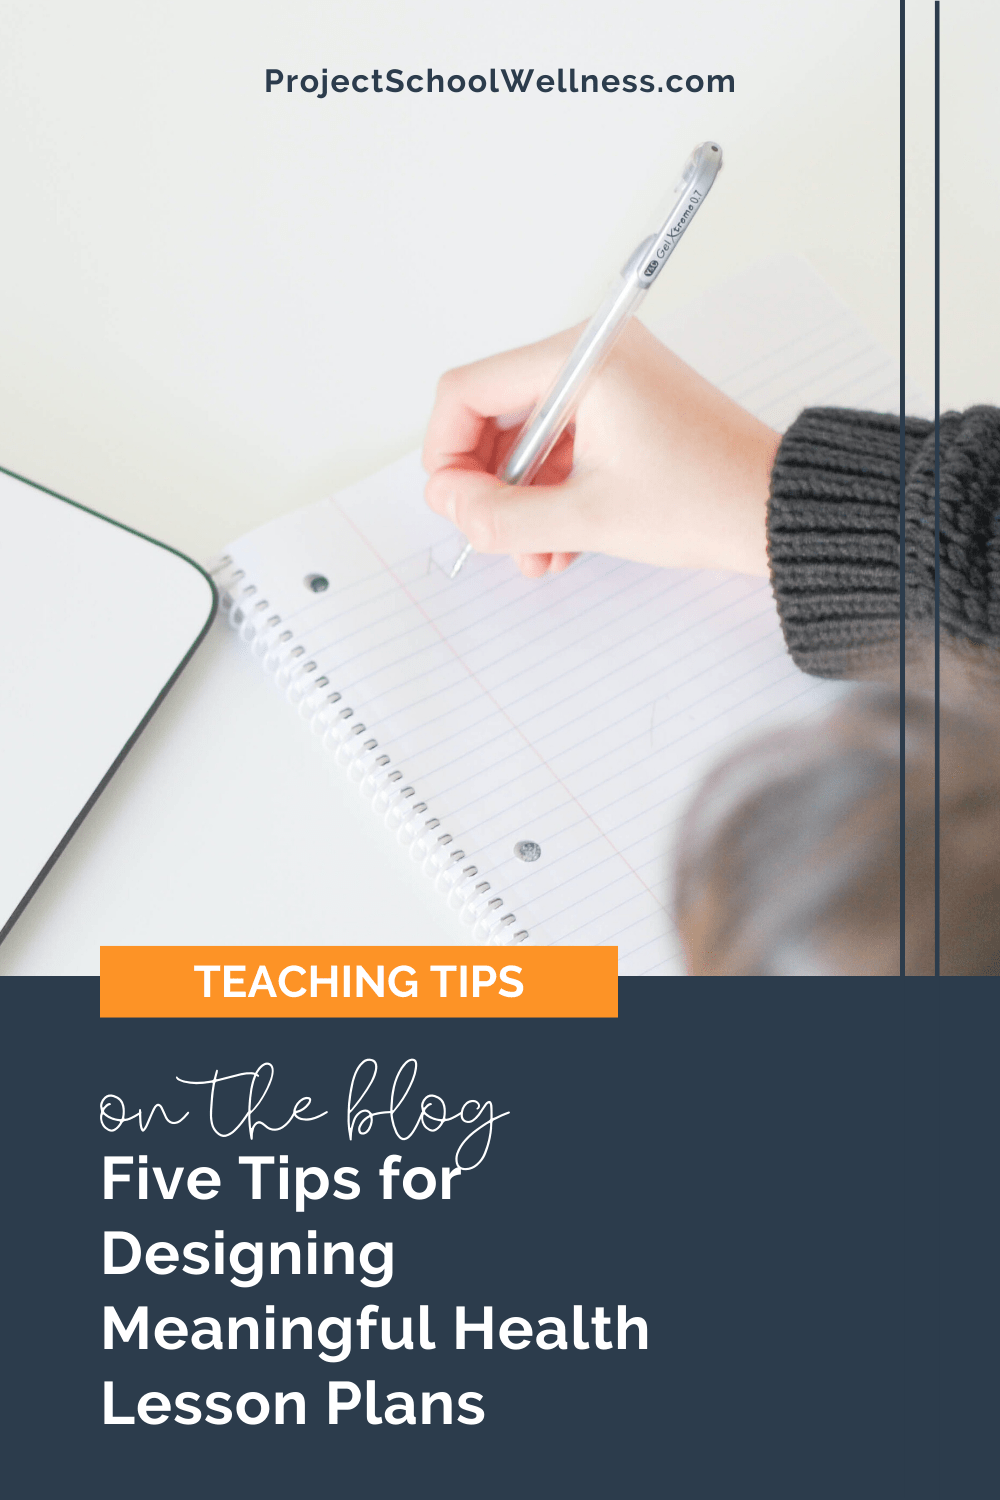 Health Teaching Tips - Five Tips for Designing Meaningful Health lesson Plans - Tips from Janelle of Project School Wellness